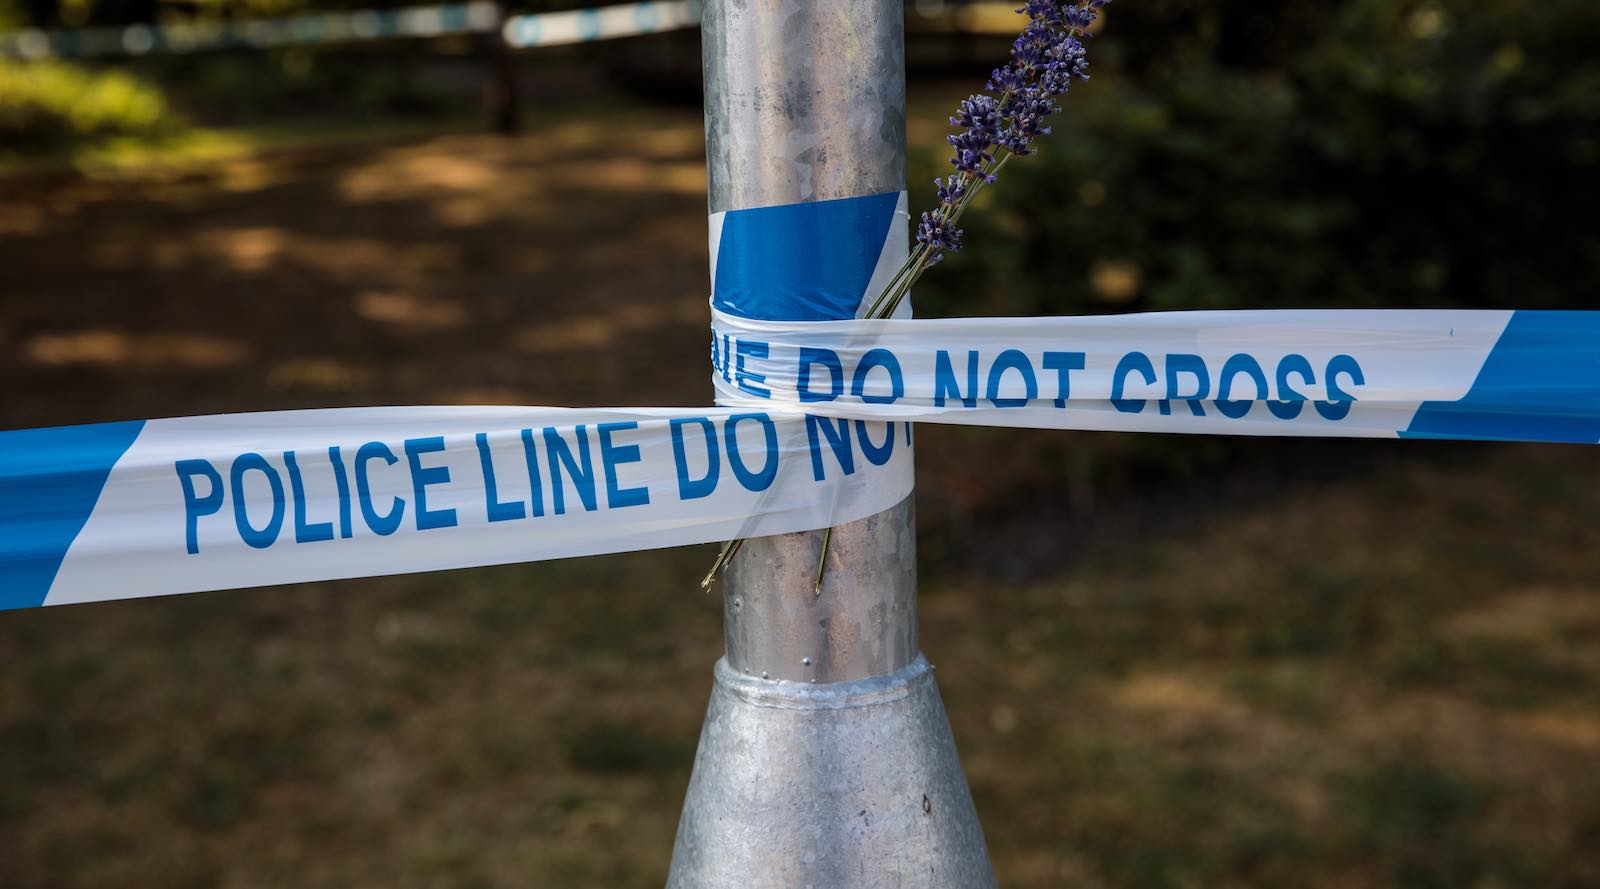 A police cordon in place at Queen Elizabeth Gardens in Salisbury after a man and woman were exposed to the Novichok nerve agent (Photo: Jack Taylor/Getty)